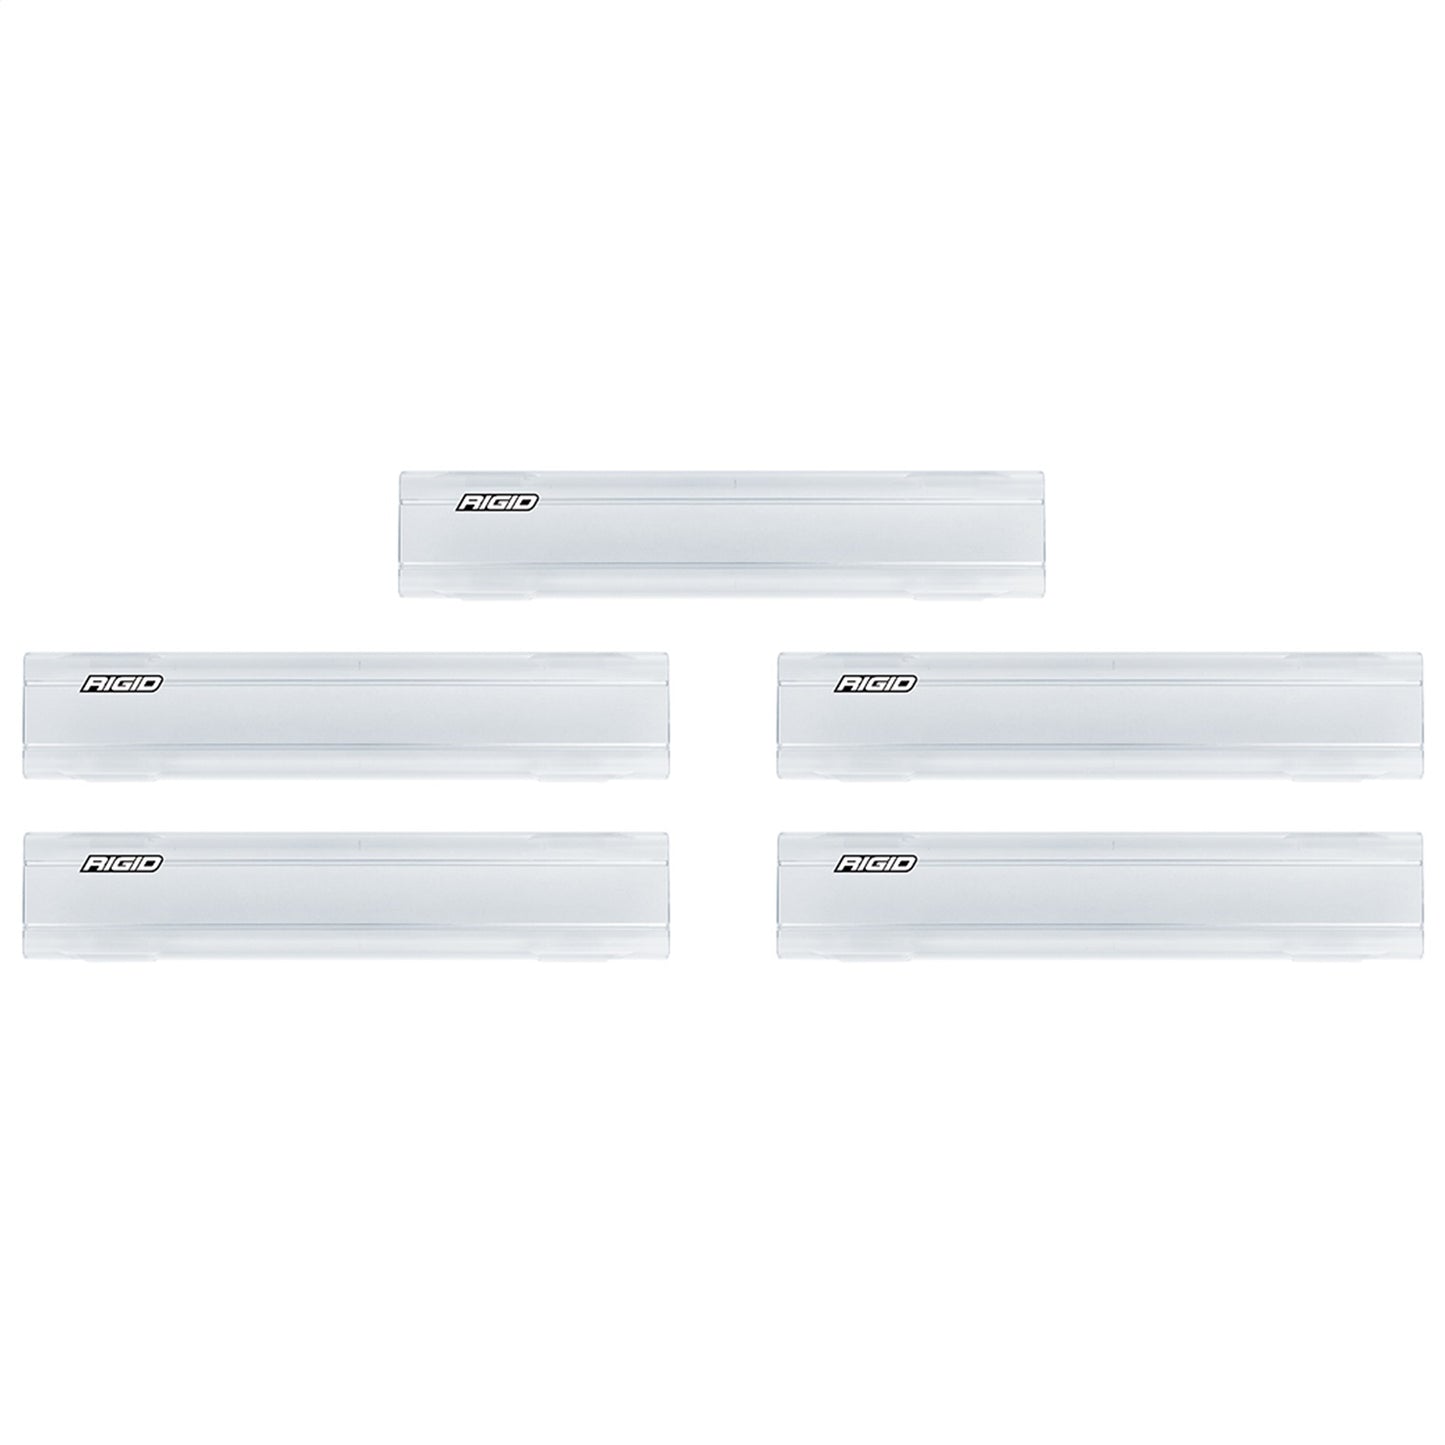 RIGID Industries 134354 RIGID Light Cover For 54 Inch RDS SR-Series, Clear, Set Of 5